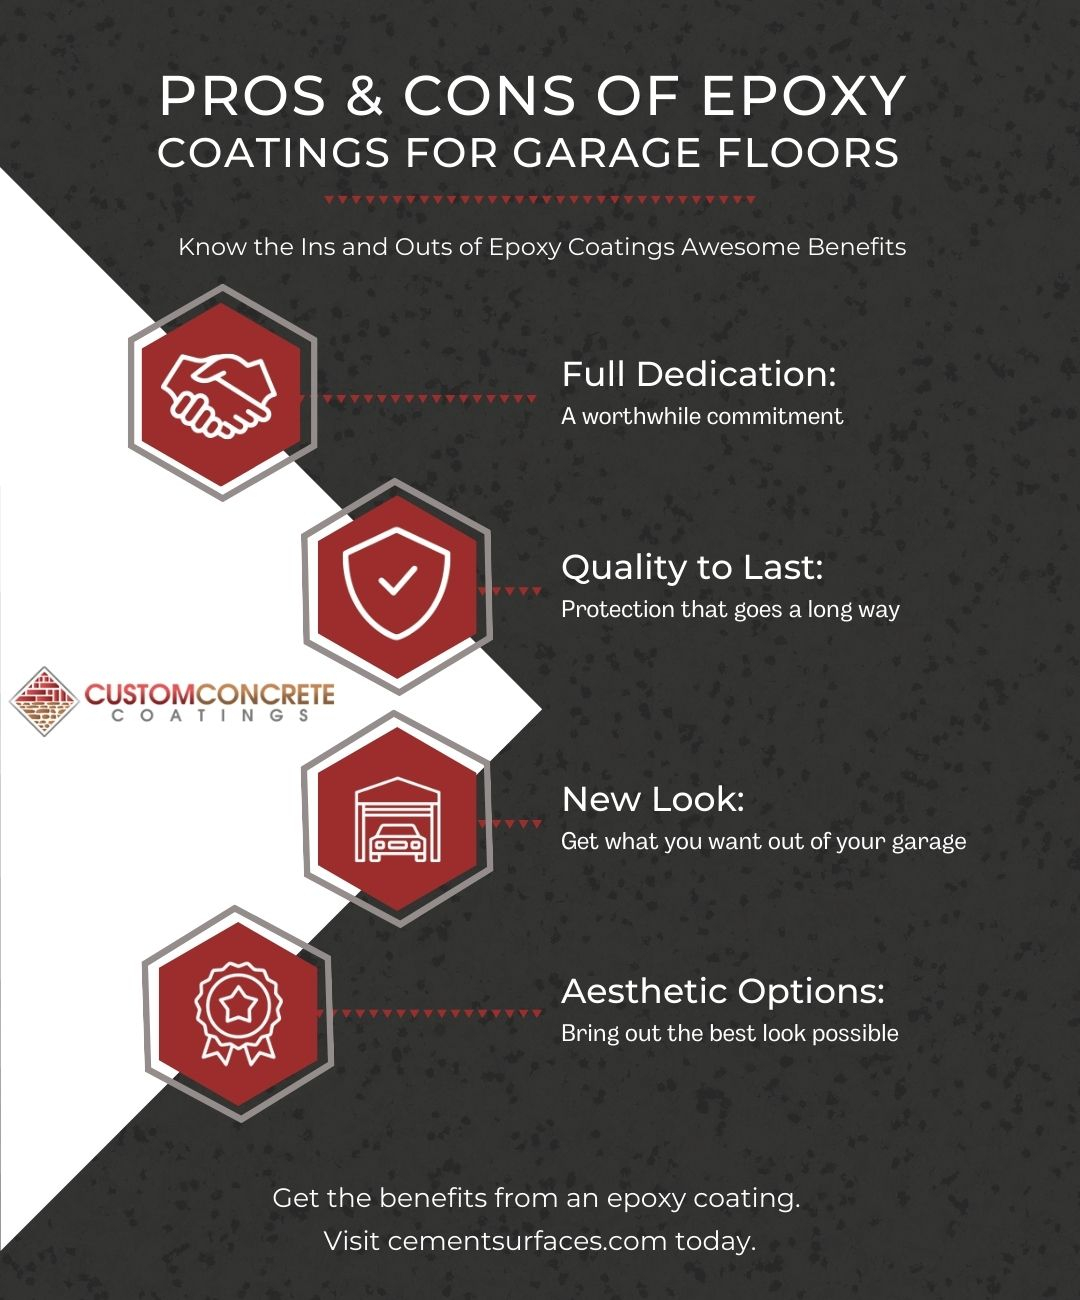 M33858 - Infographic - Pros and Cons of Epoxy Coatings for Garage Floors.jpg